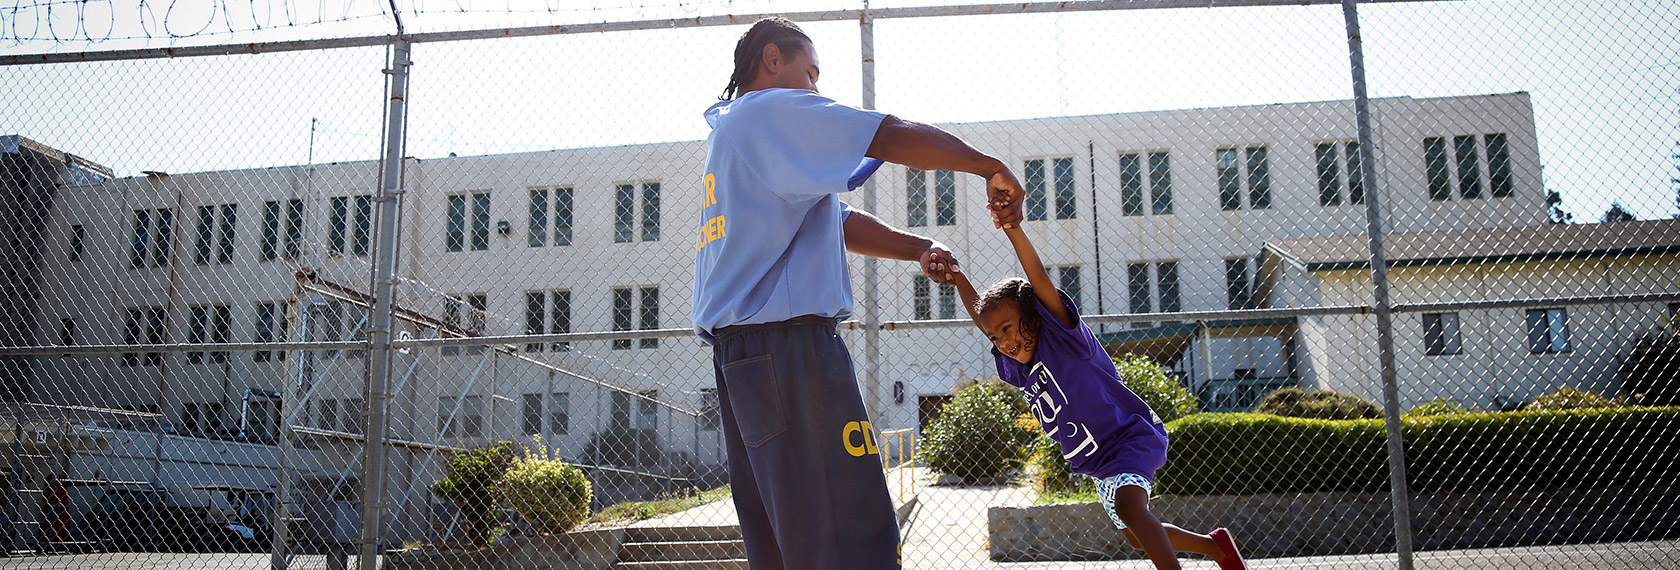 A man in a CDCR uniform swings a child by the arms, both are smiling.